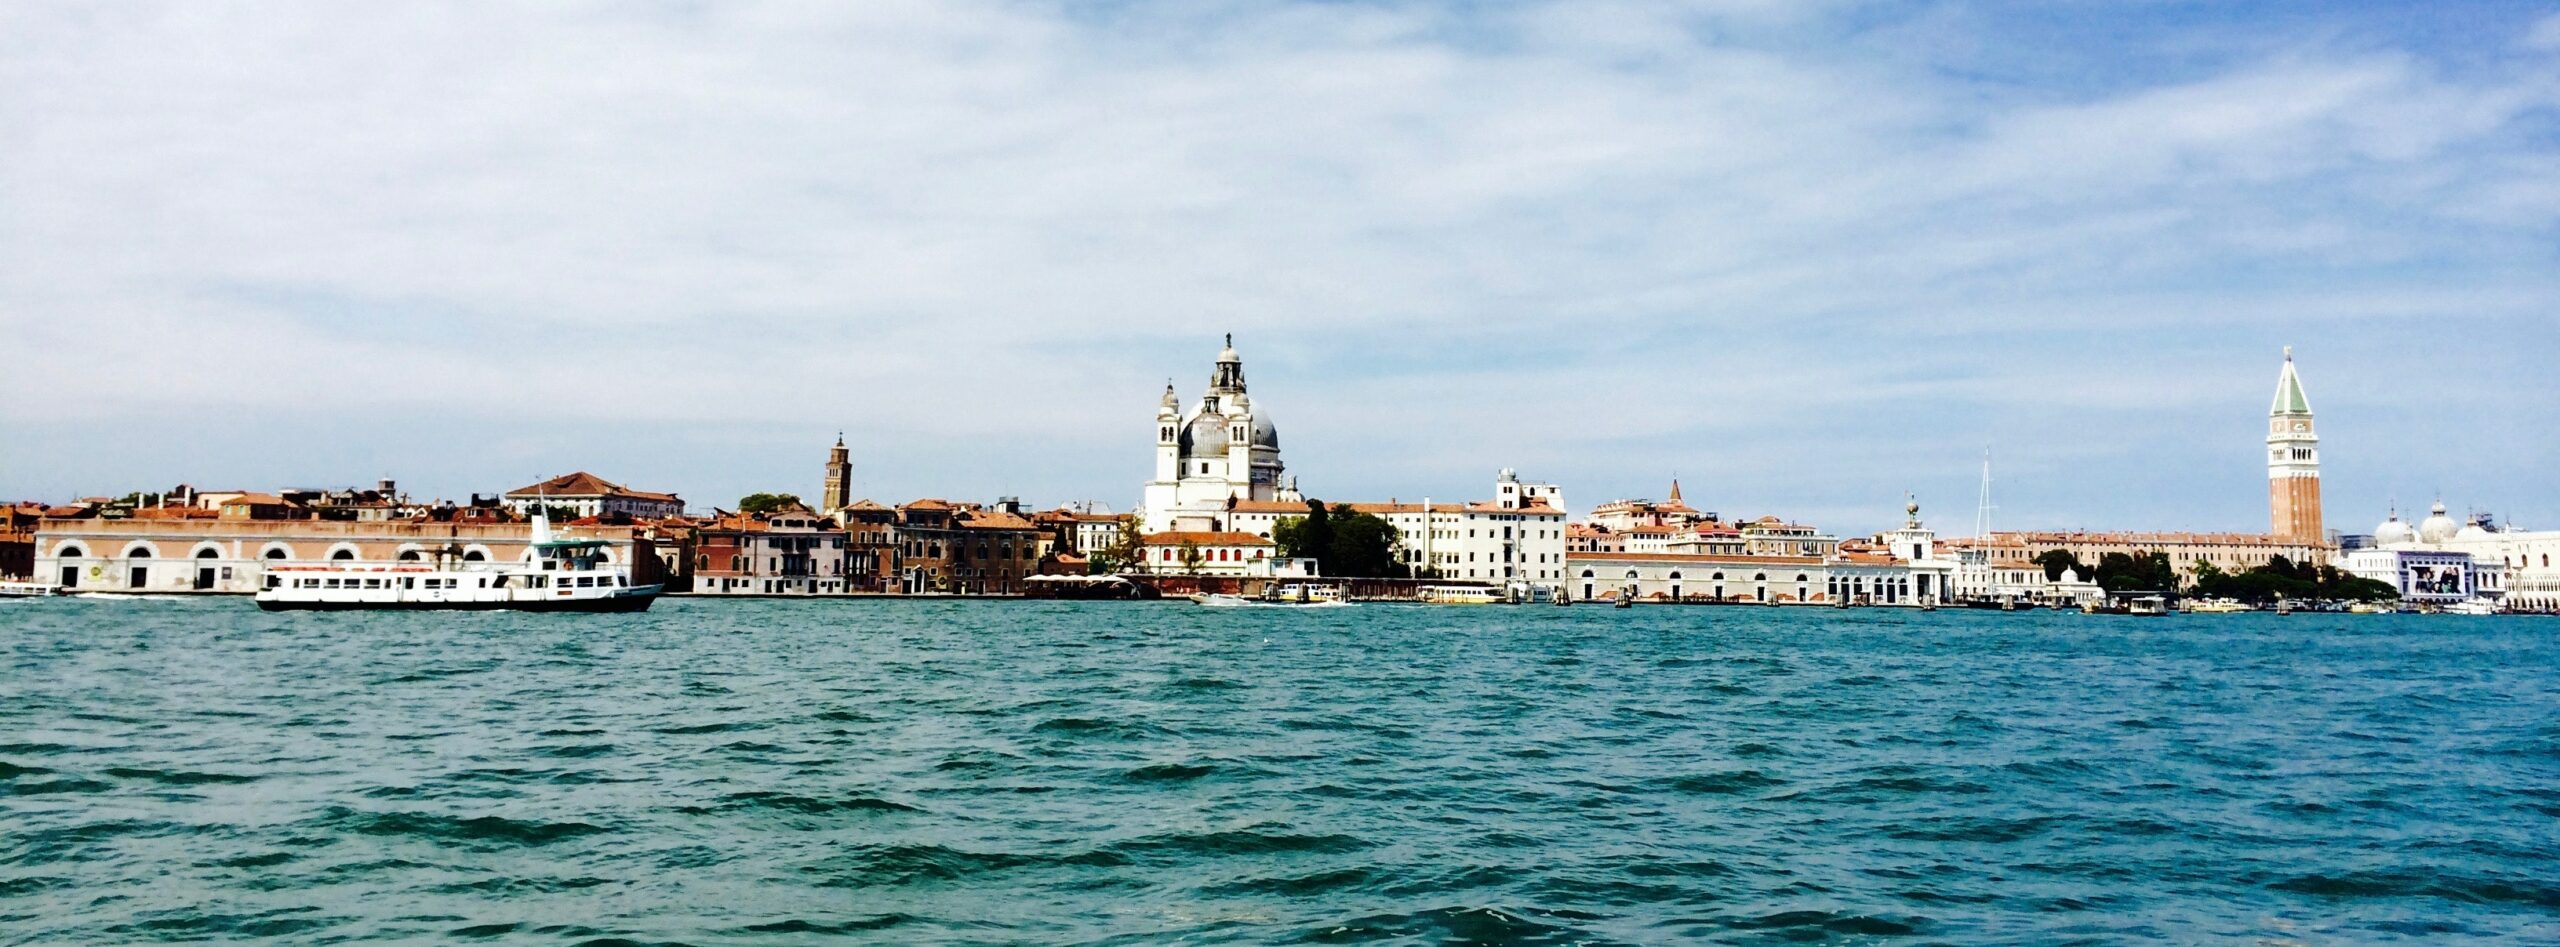 5 Things To Do and Where To Eat in Cannaregio, Venice